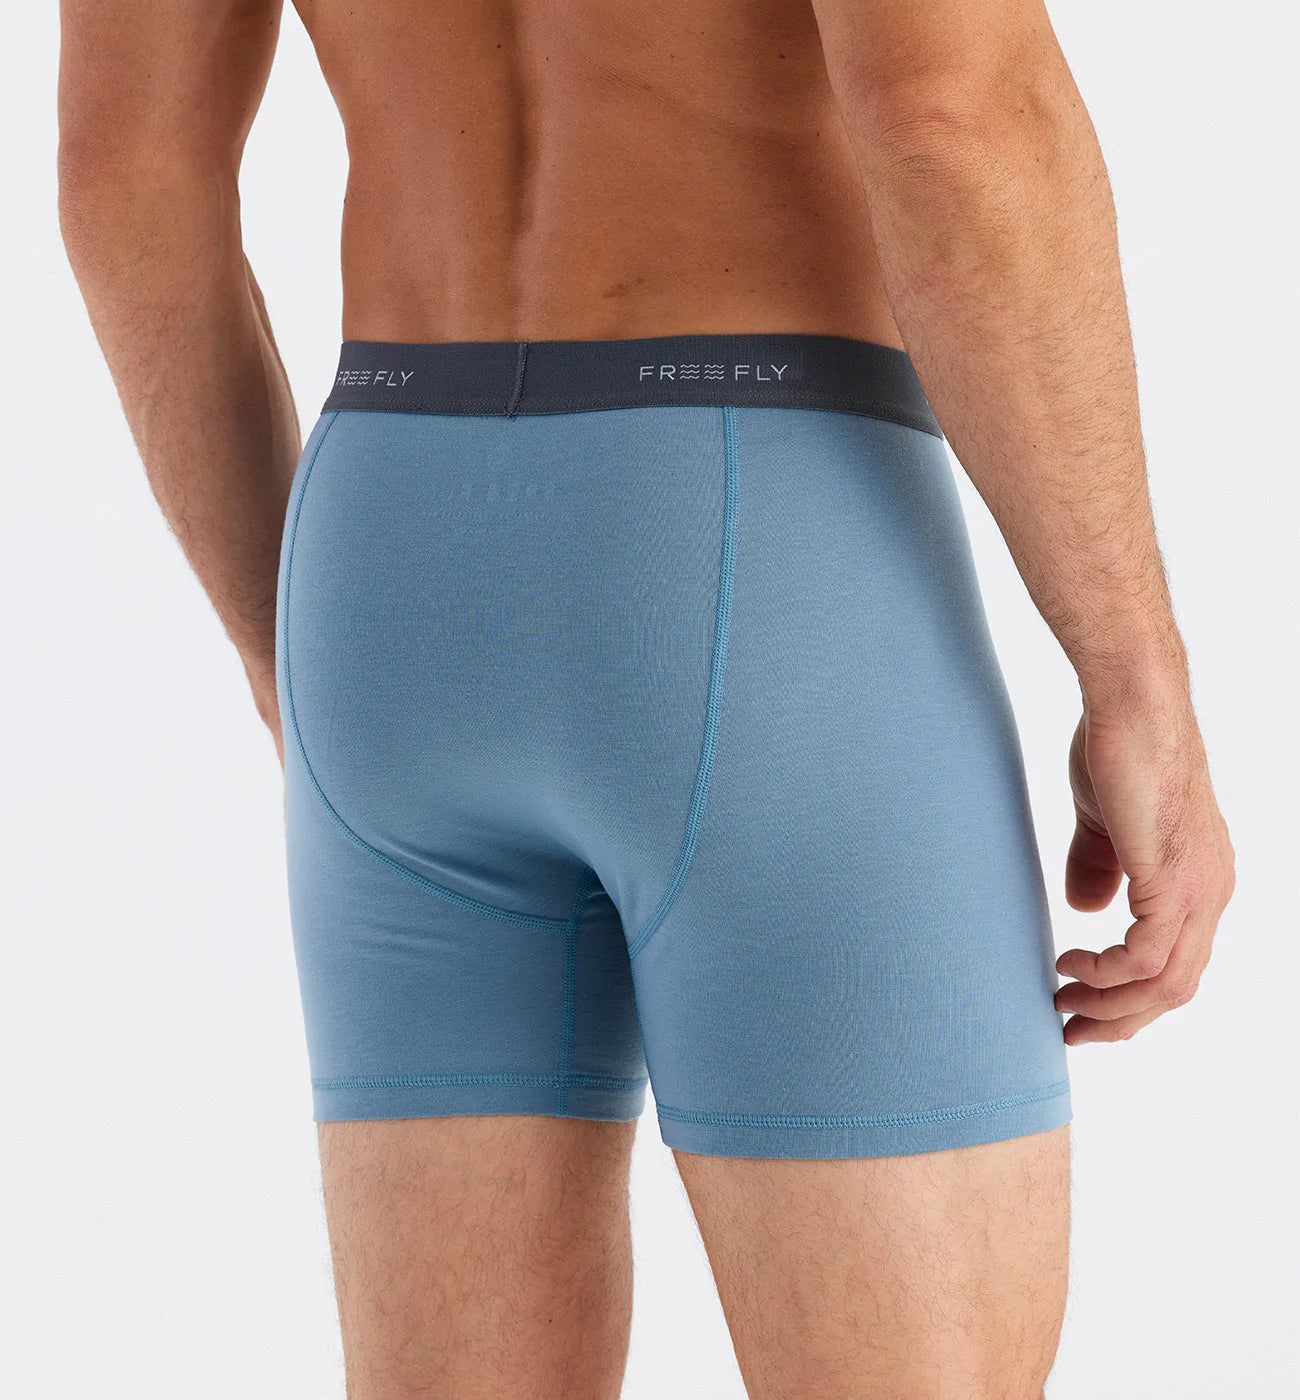 Step One Men's Bamboo Underwear Questions